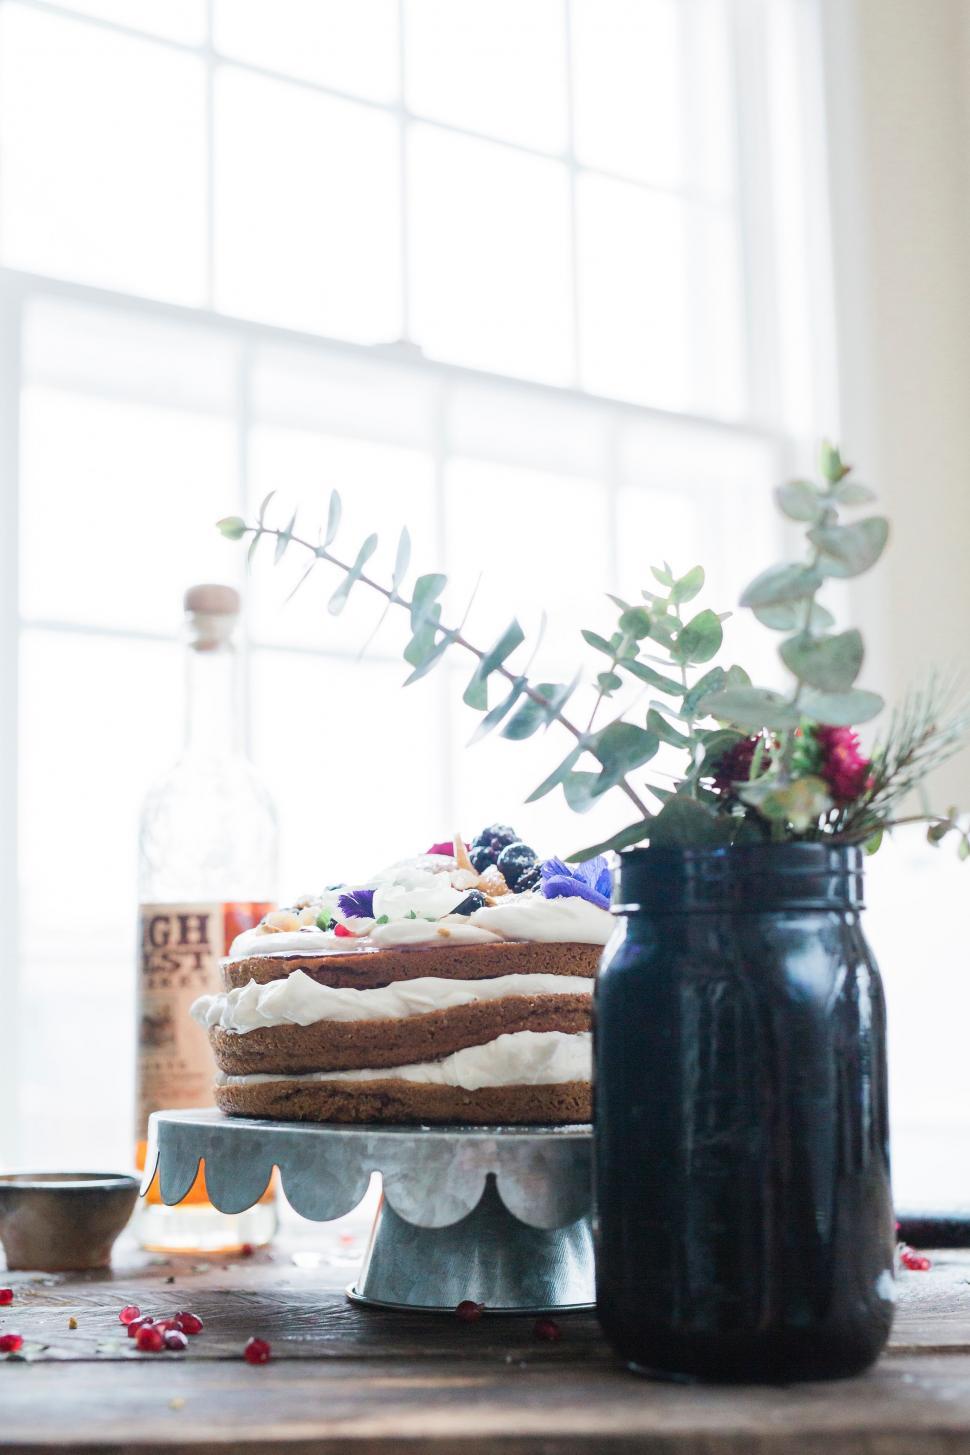 Free Image of Cake on Wooden Table 